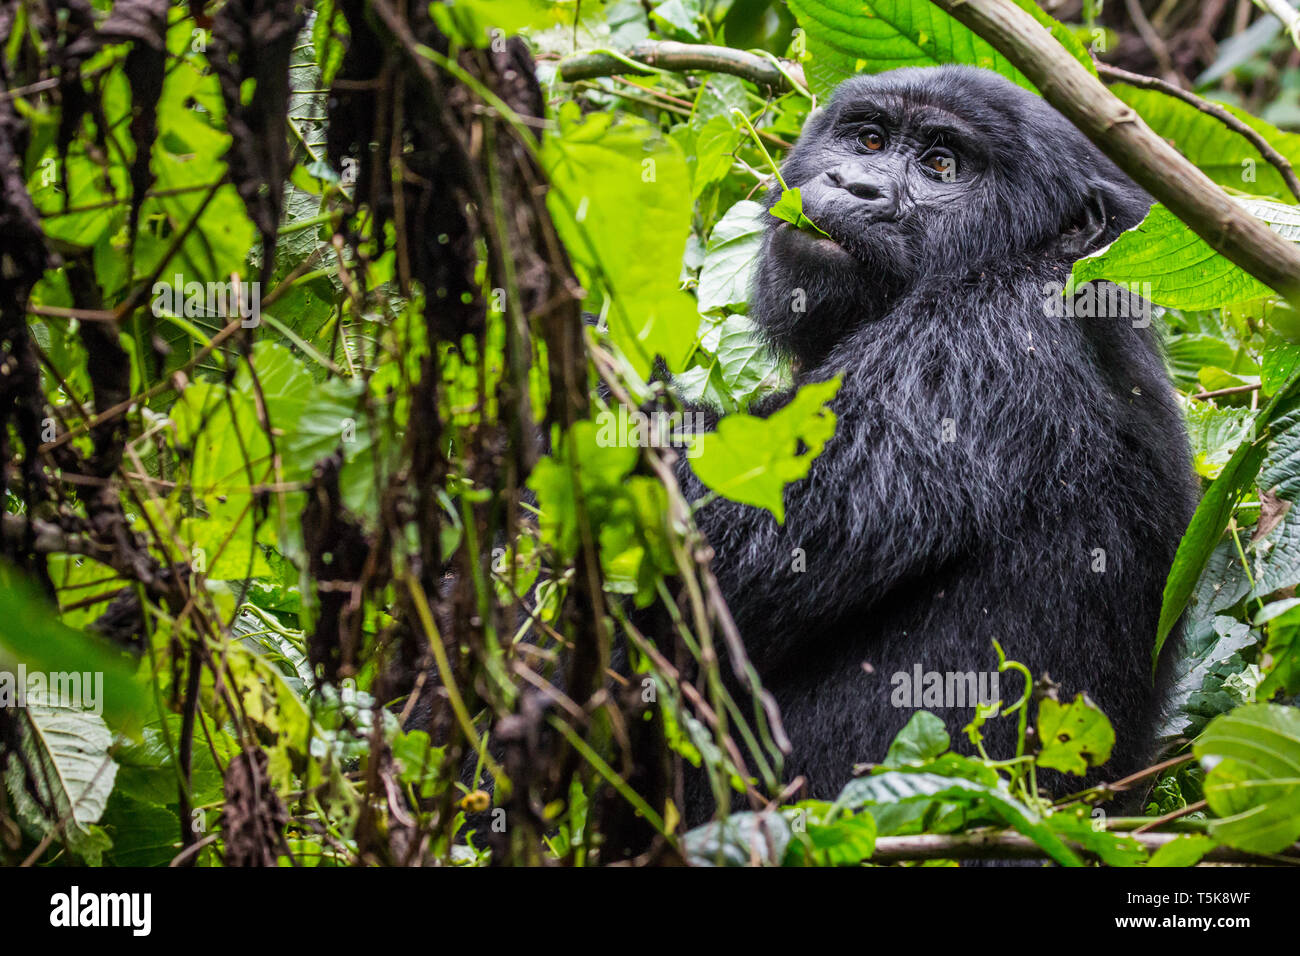 A young gorilla eats leaves as it looks into the camera in Uganda Stock Photo